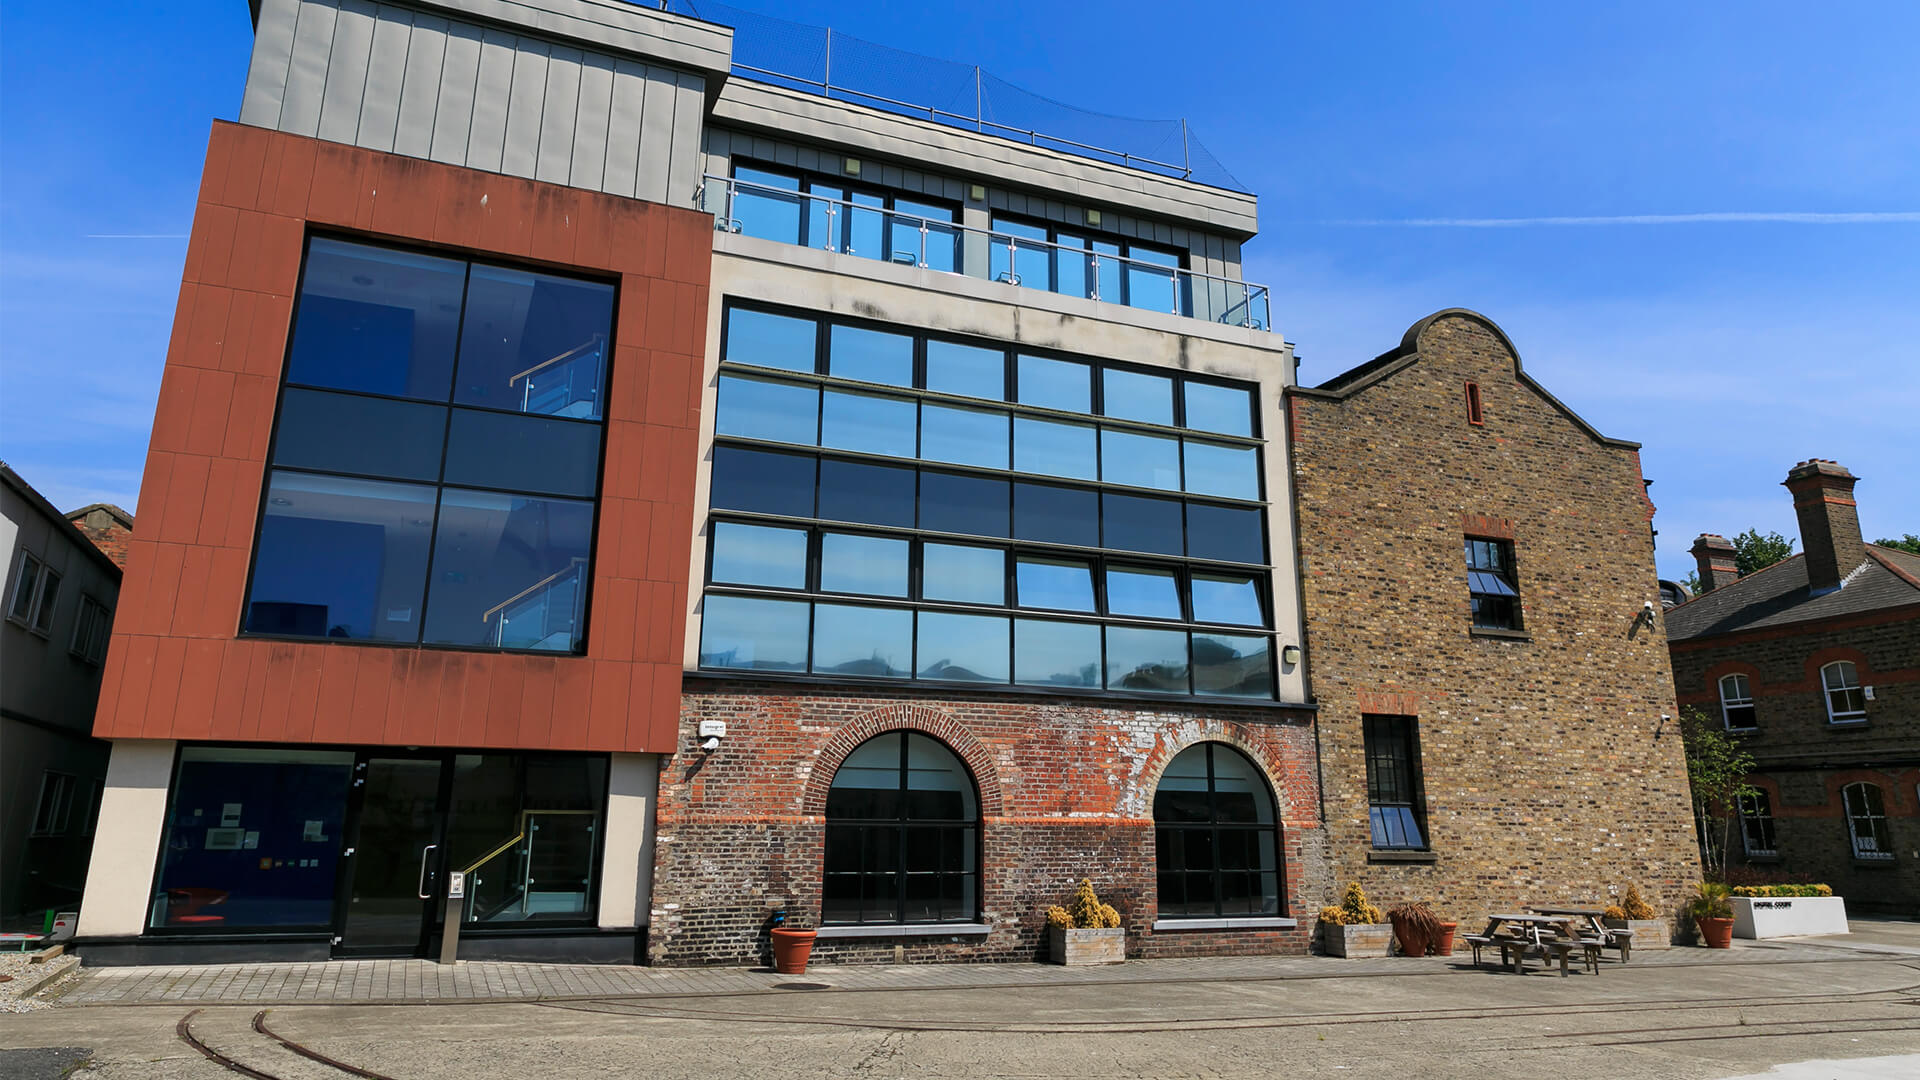 New meets old in the Digital Court, where a sleek modern extension is joined to the old industrial brick building